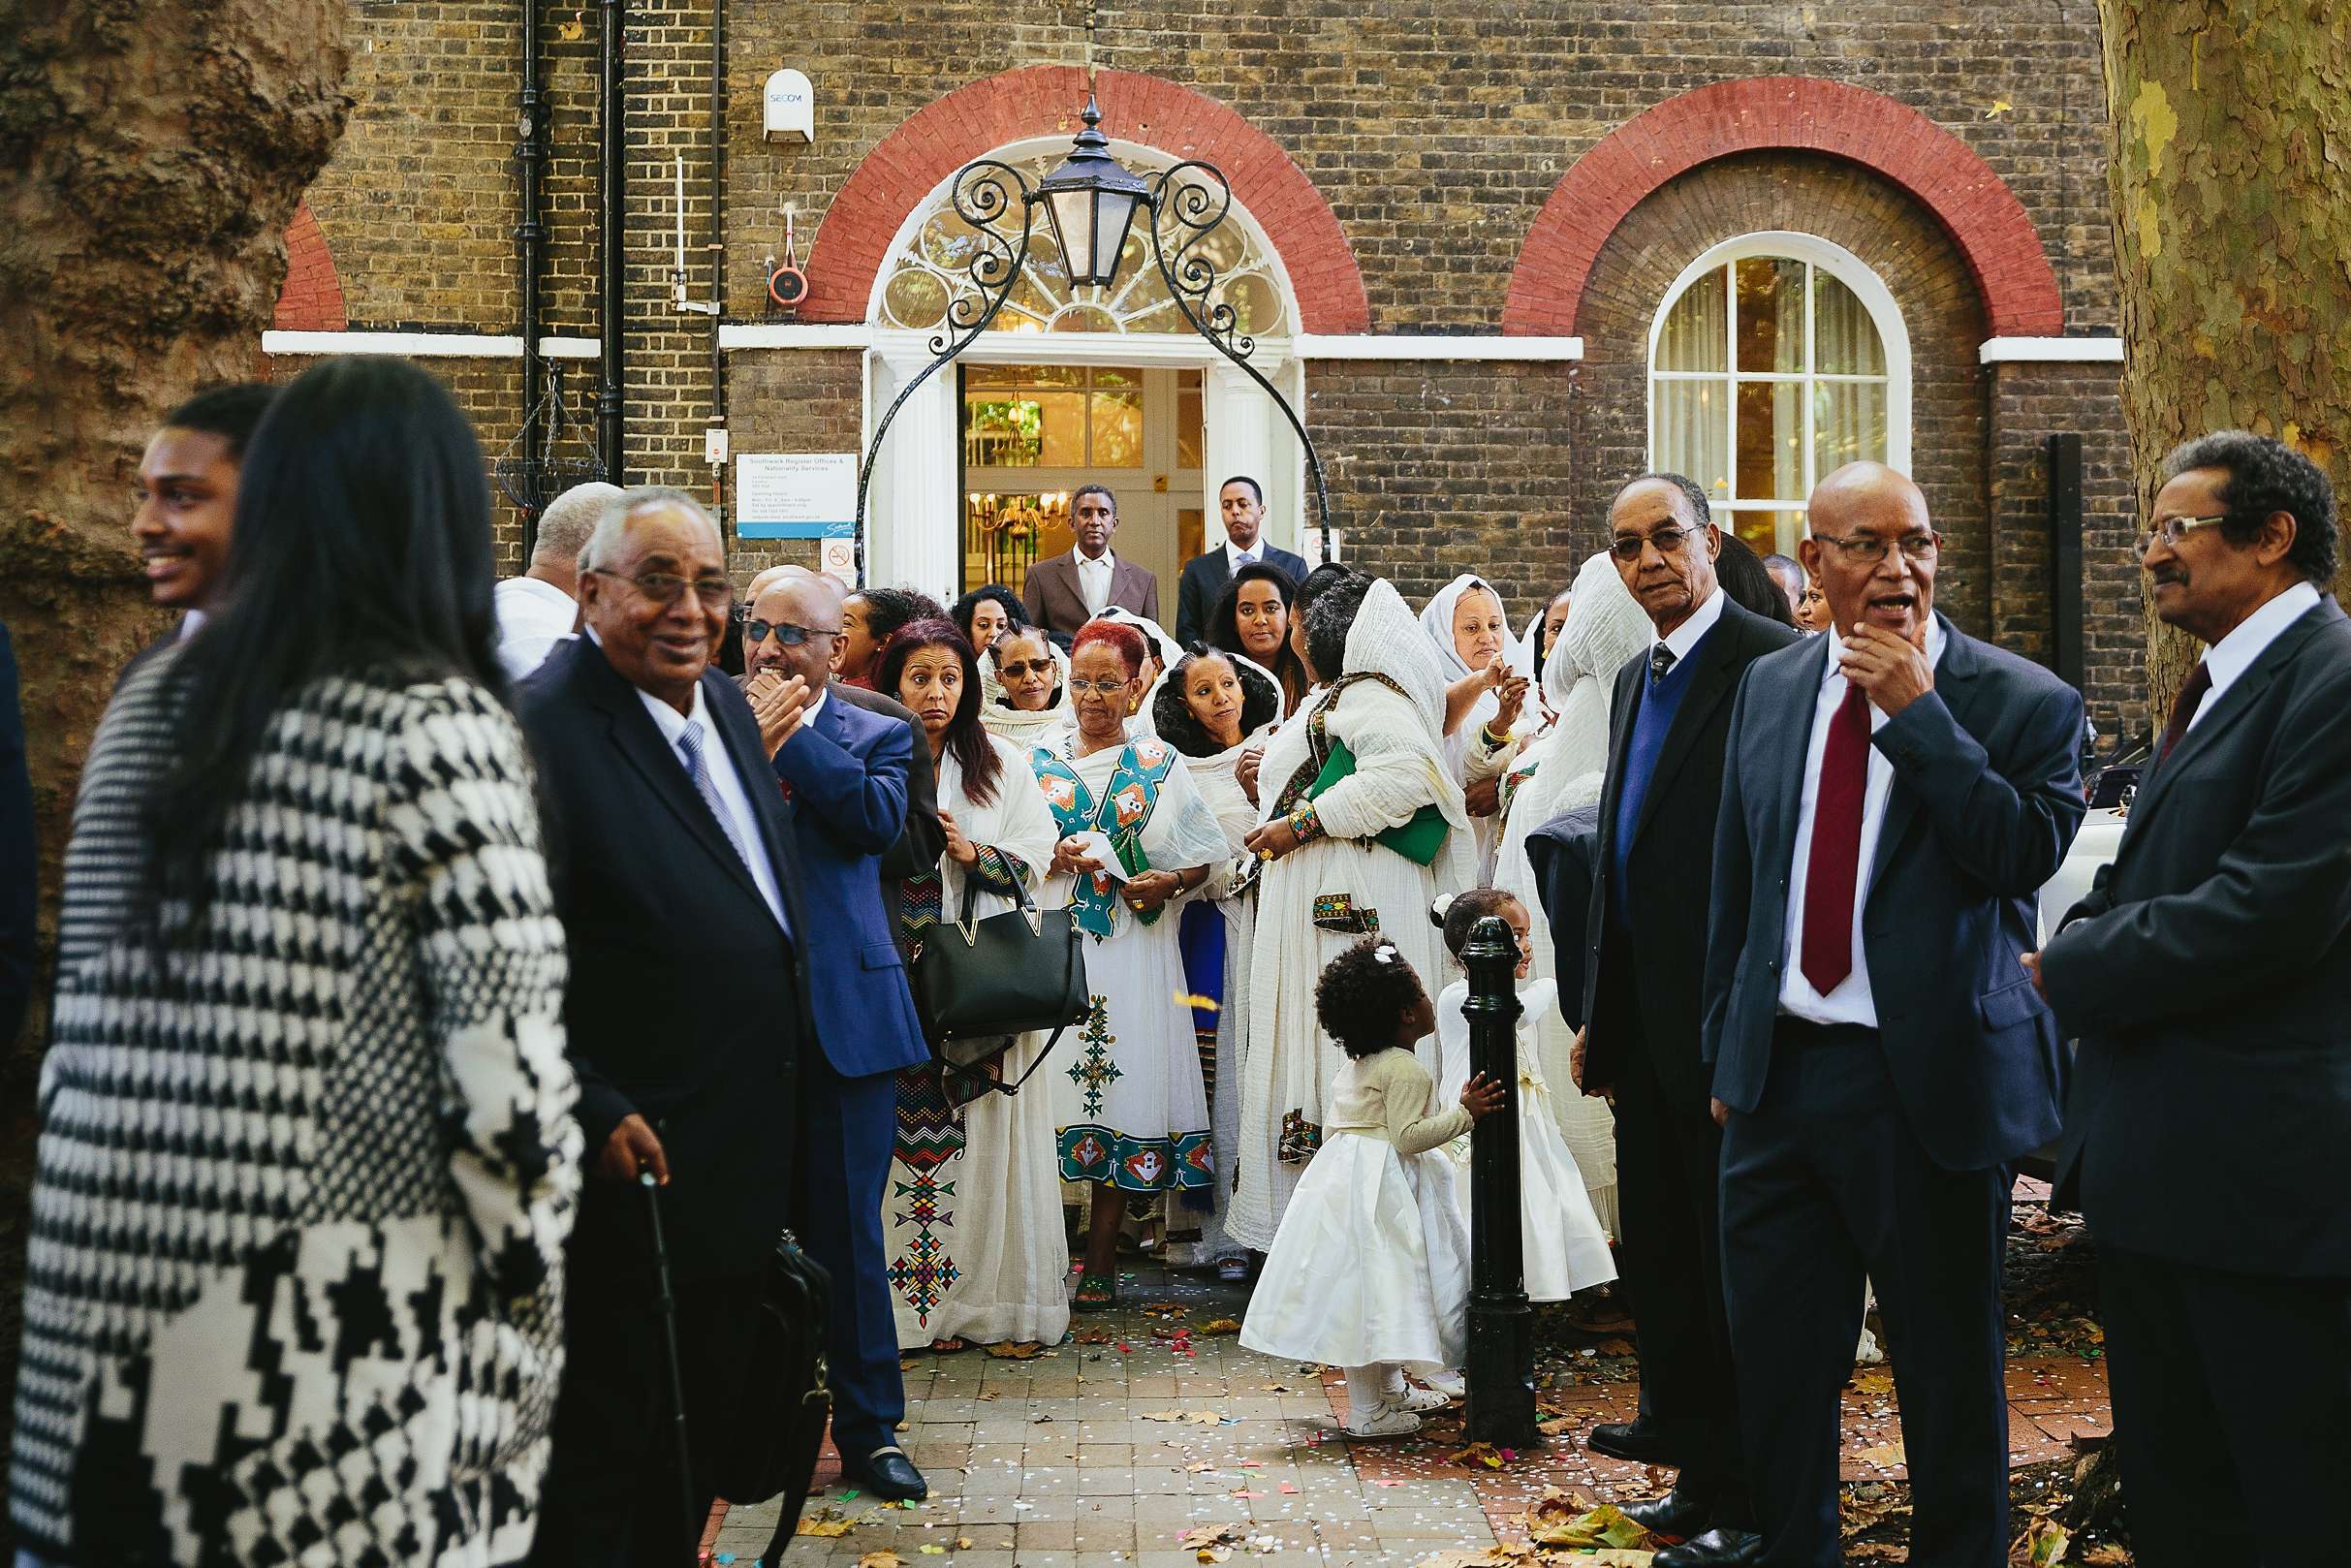 Southwark Registry Office - Mes and Manny